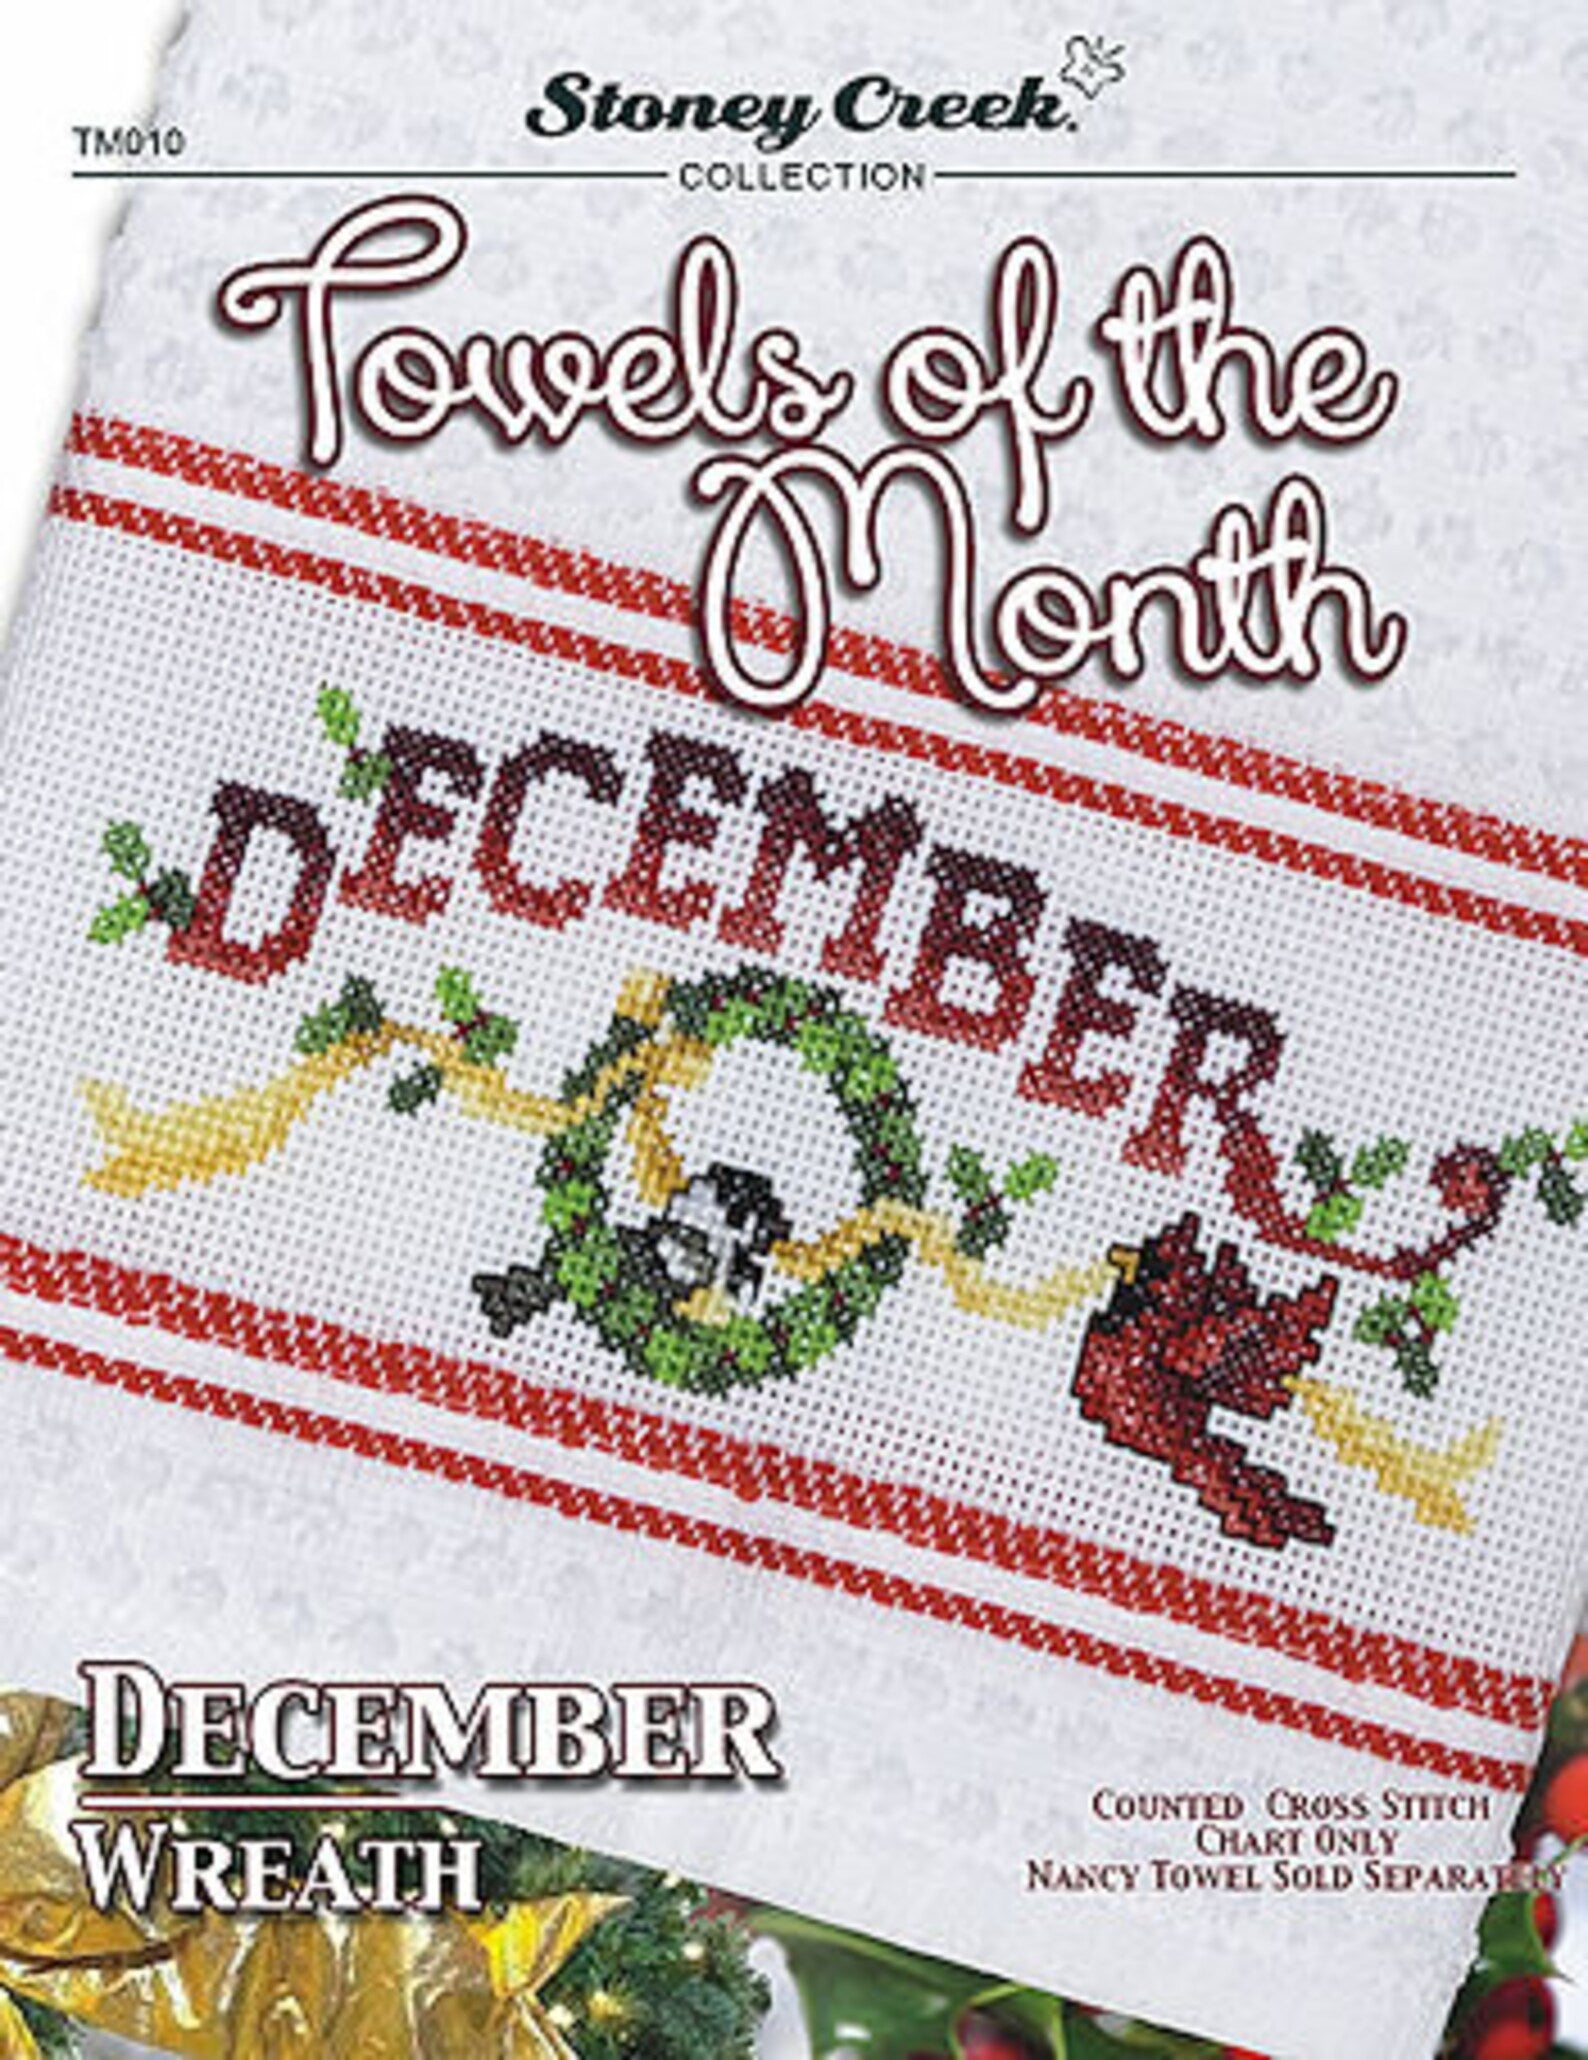 SCC - Towels Of The Month December Wreath